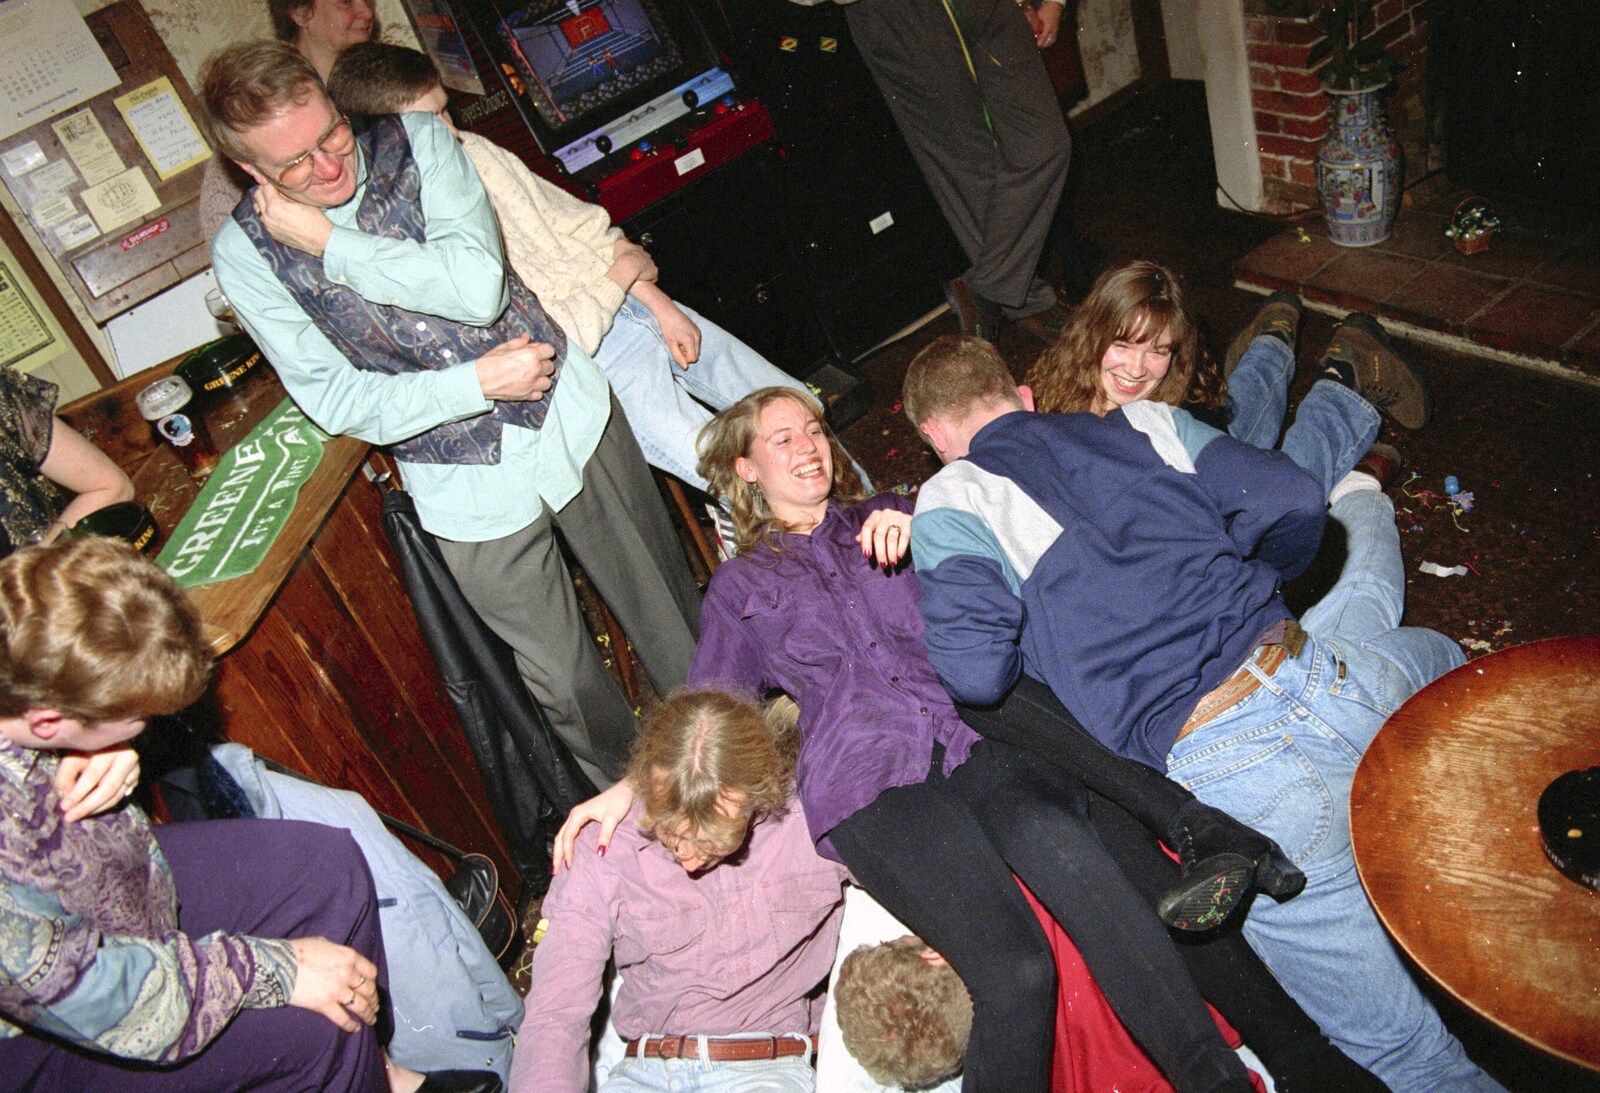 A pile of people from New Year's Eve at the Swan Inn, Brome, Suffolk - 31st December 1994